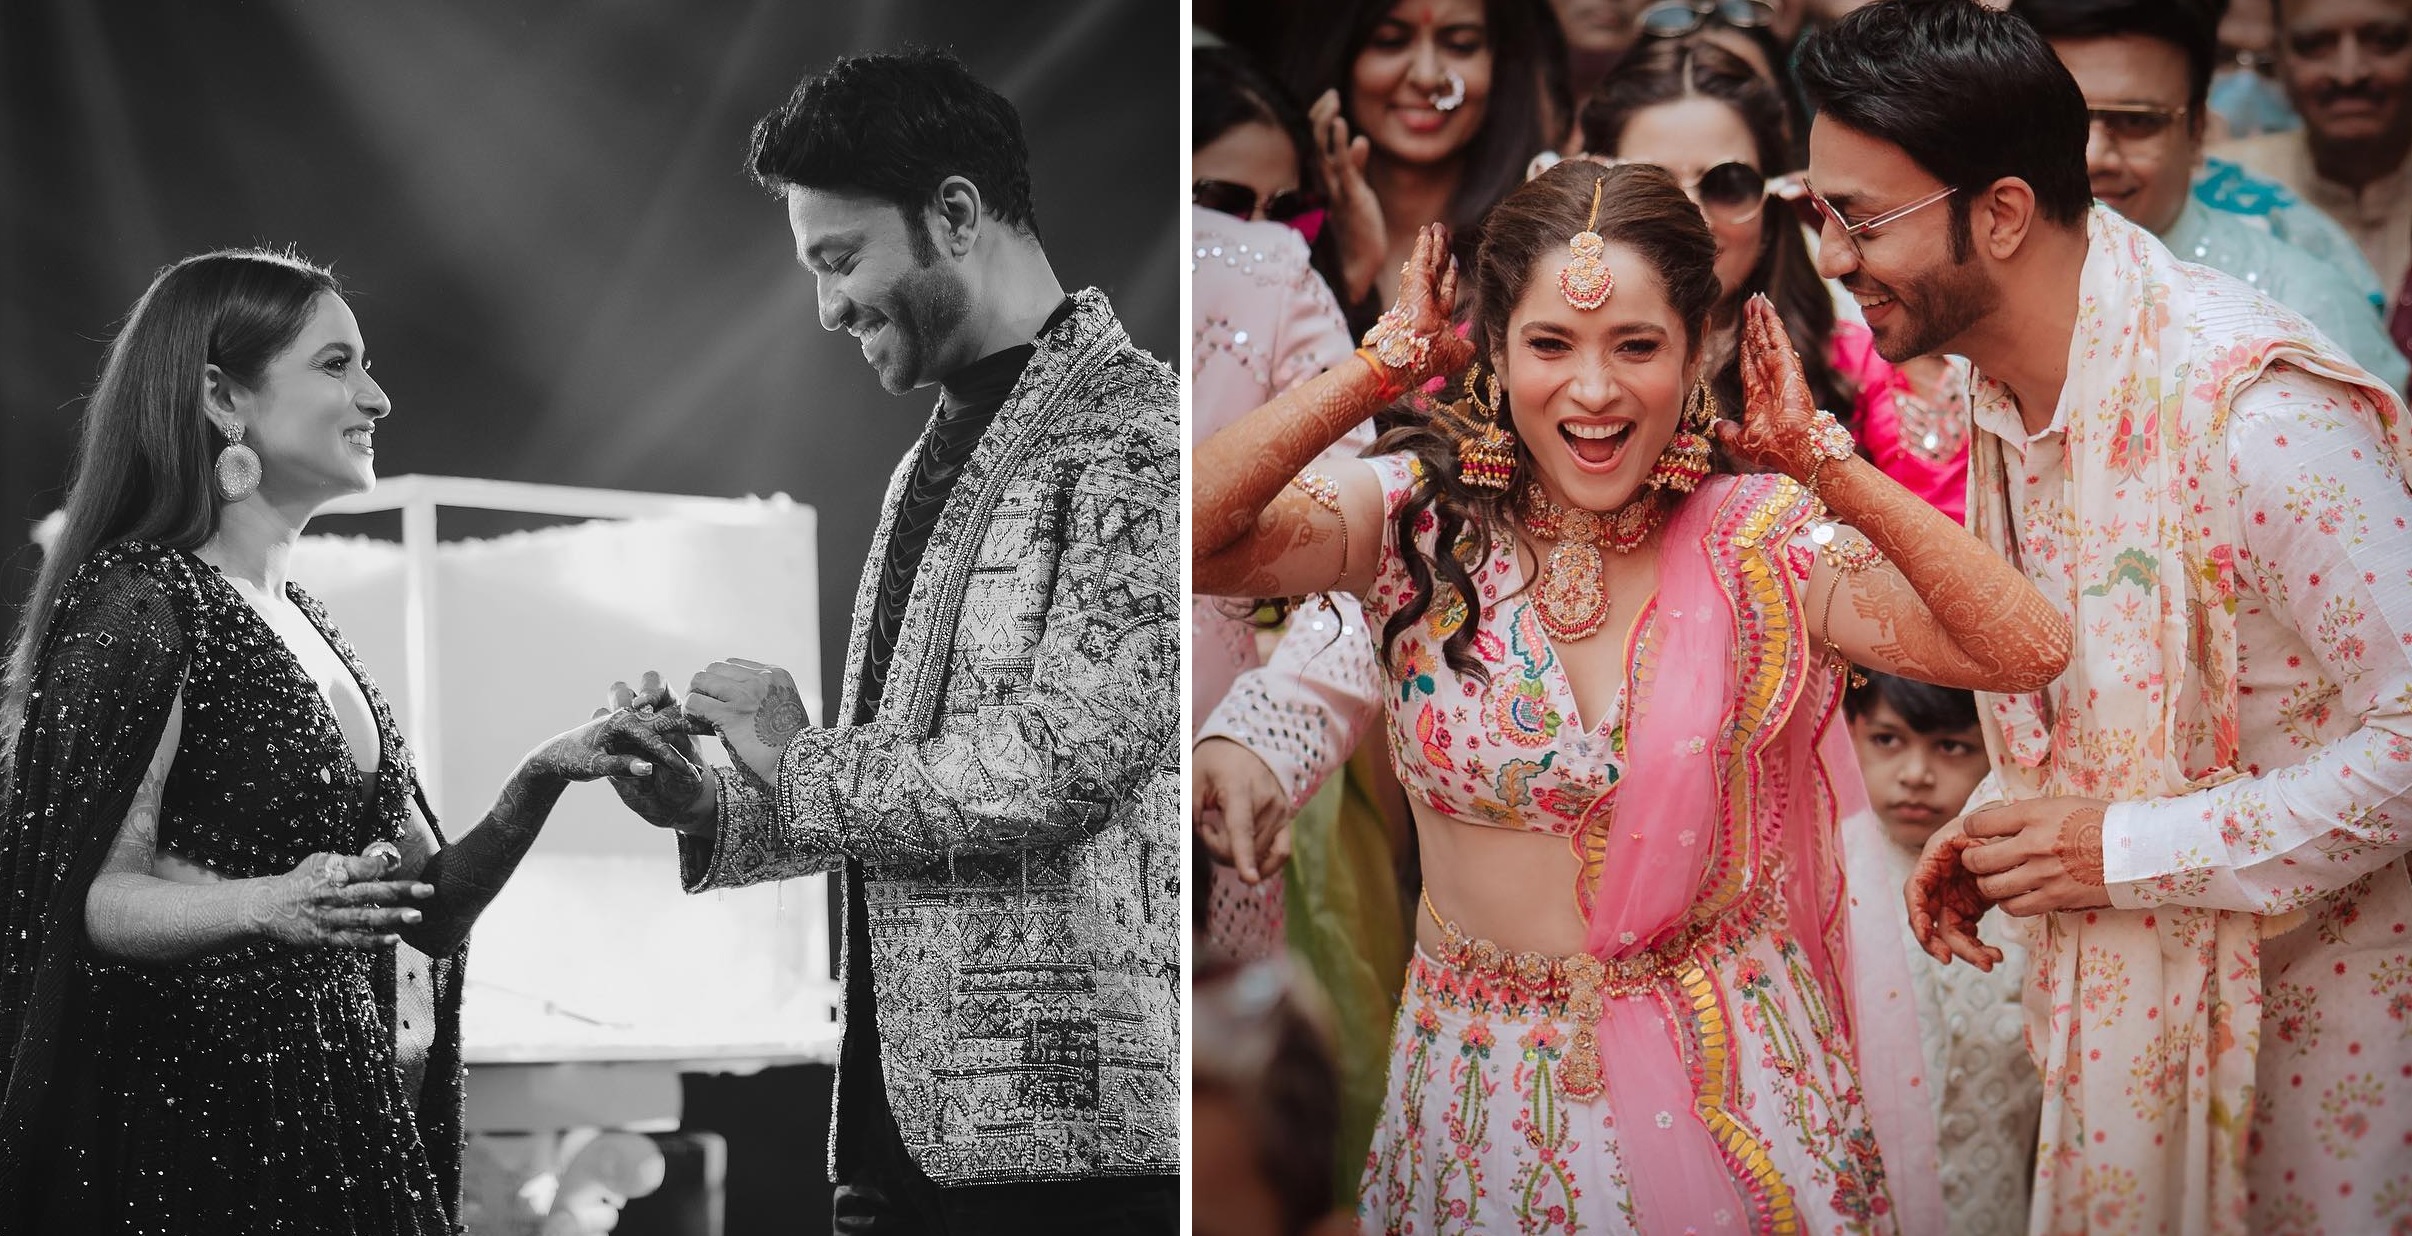 Ankita Lokhande Officially Engaged With Vicky Jain: See Pics From Their Mehendi & Engagement Cereomny